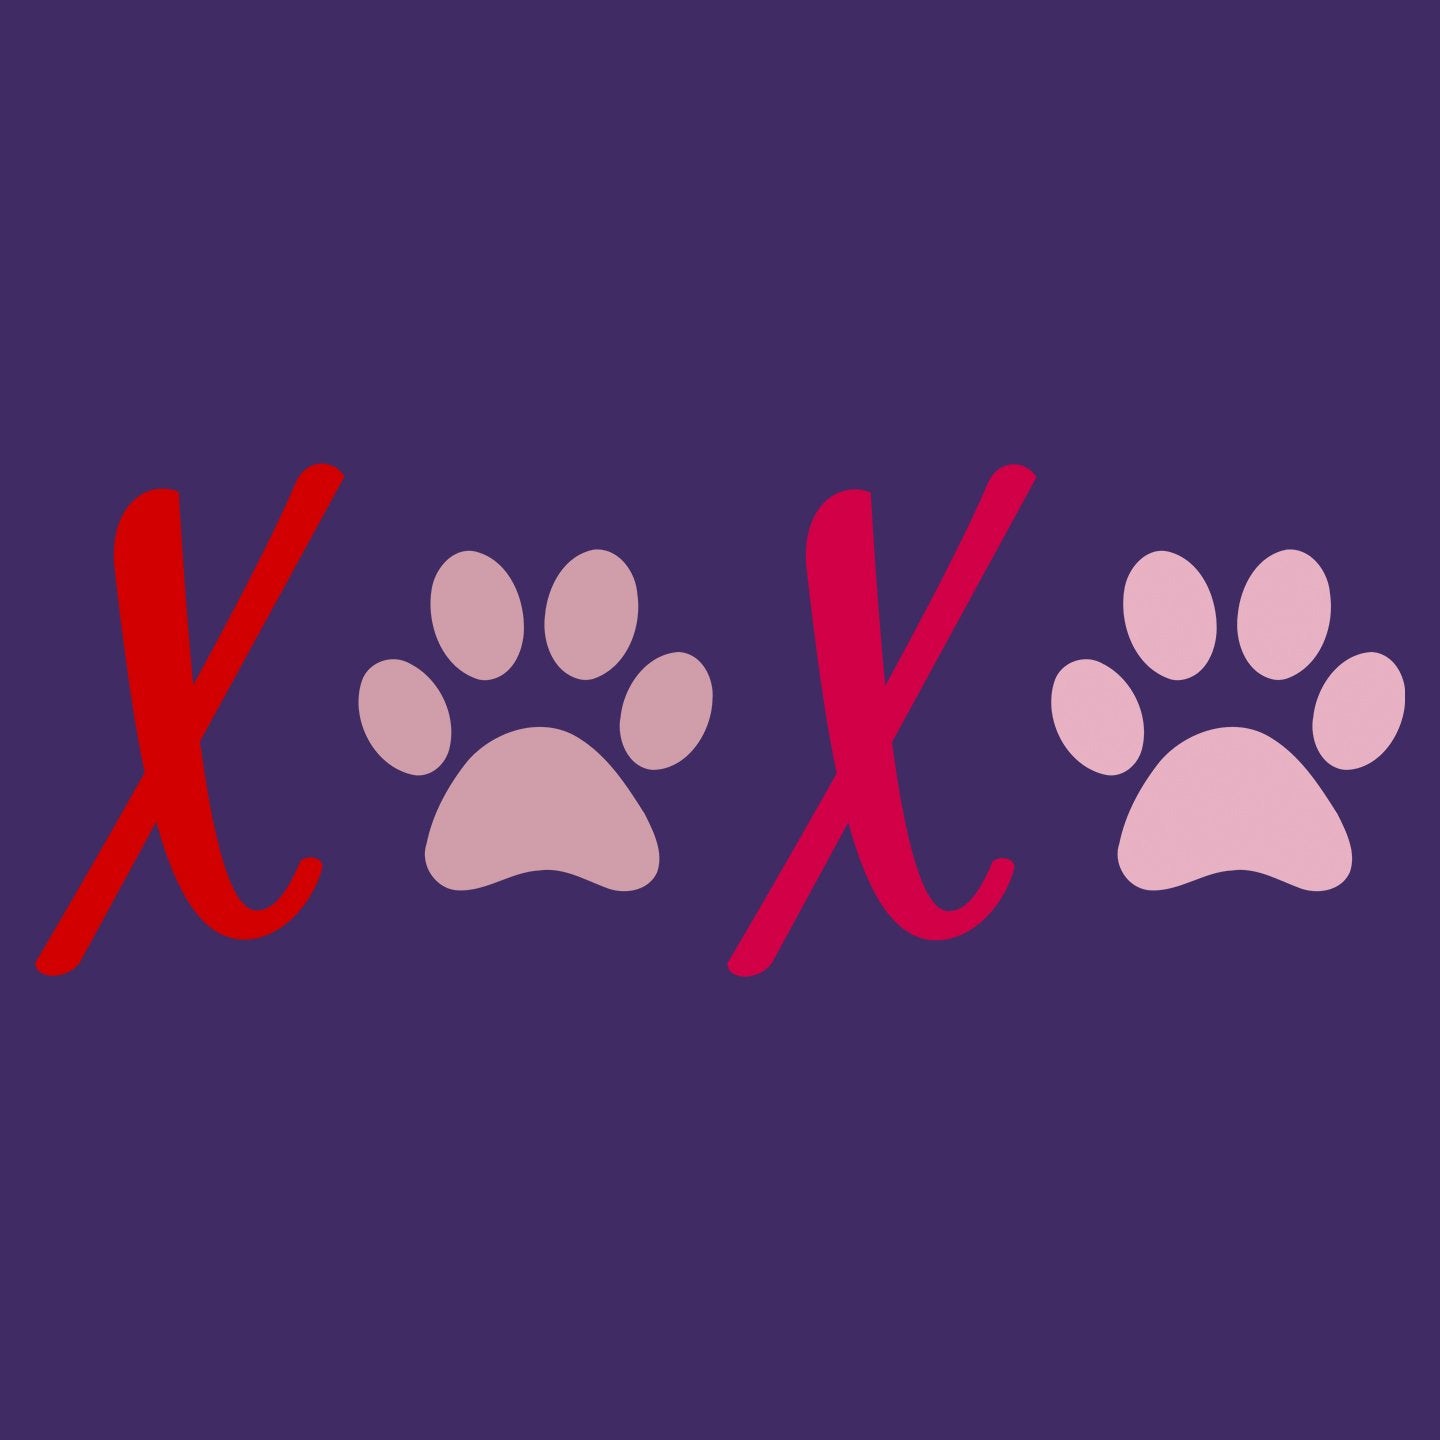 XOXO Paws - Women's Fitted T-Shirt